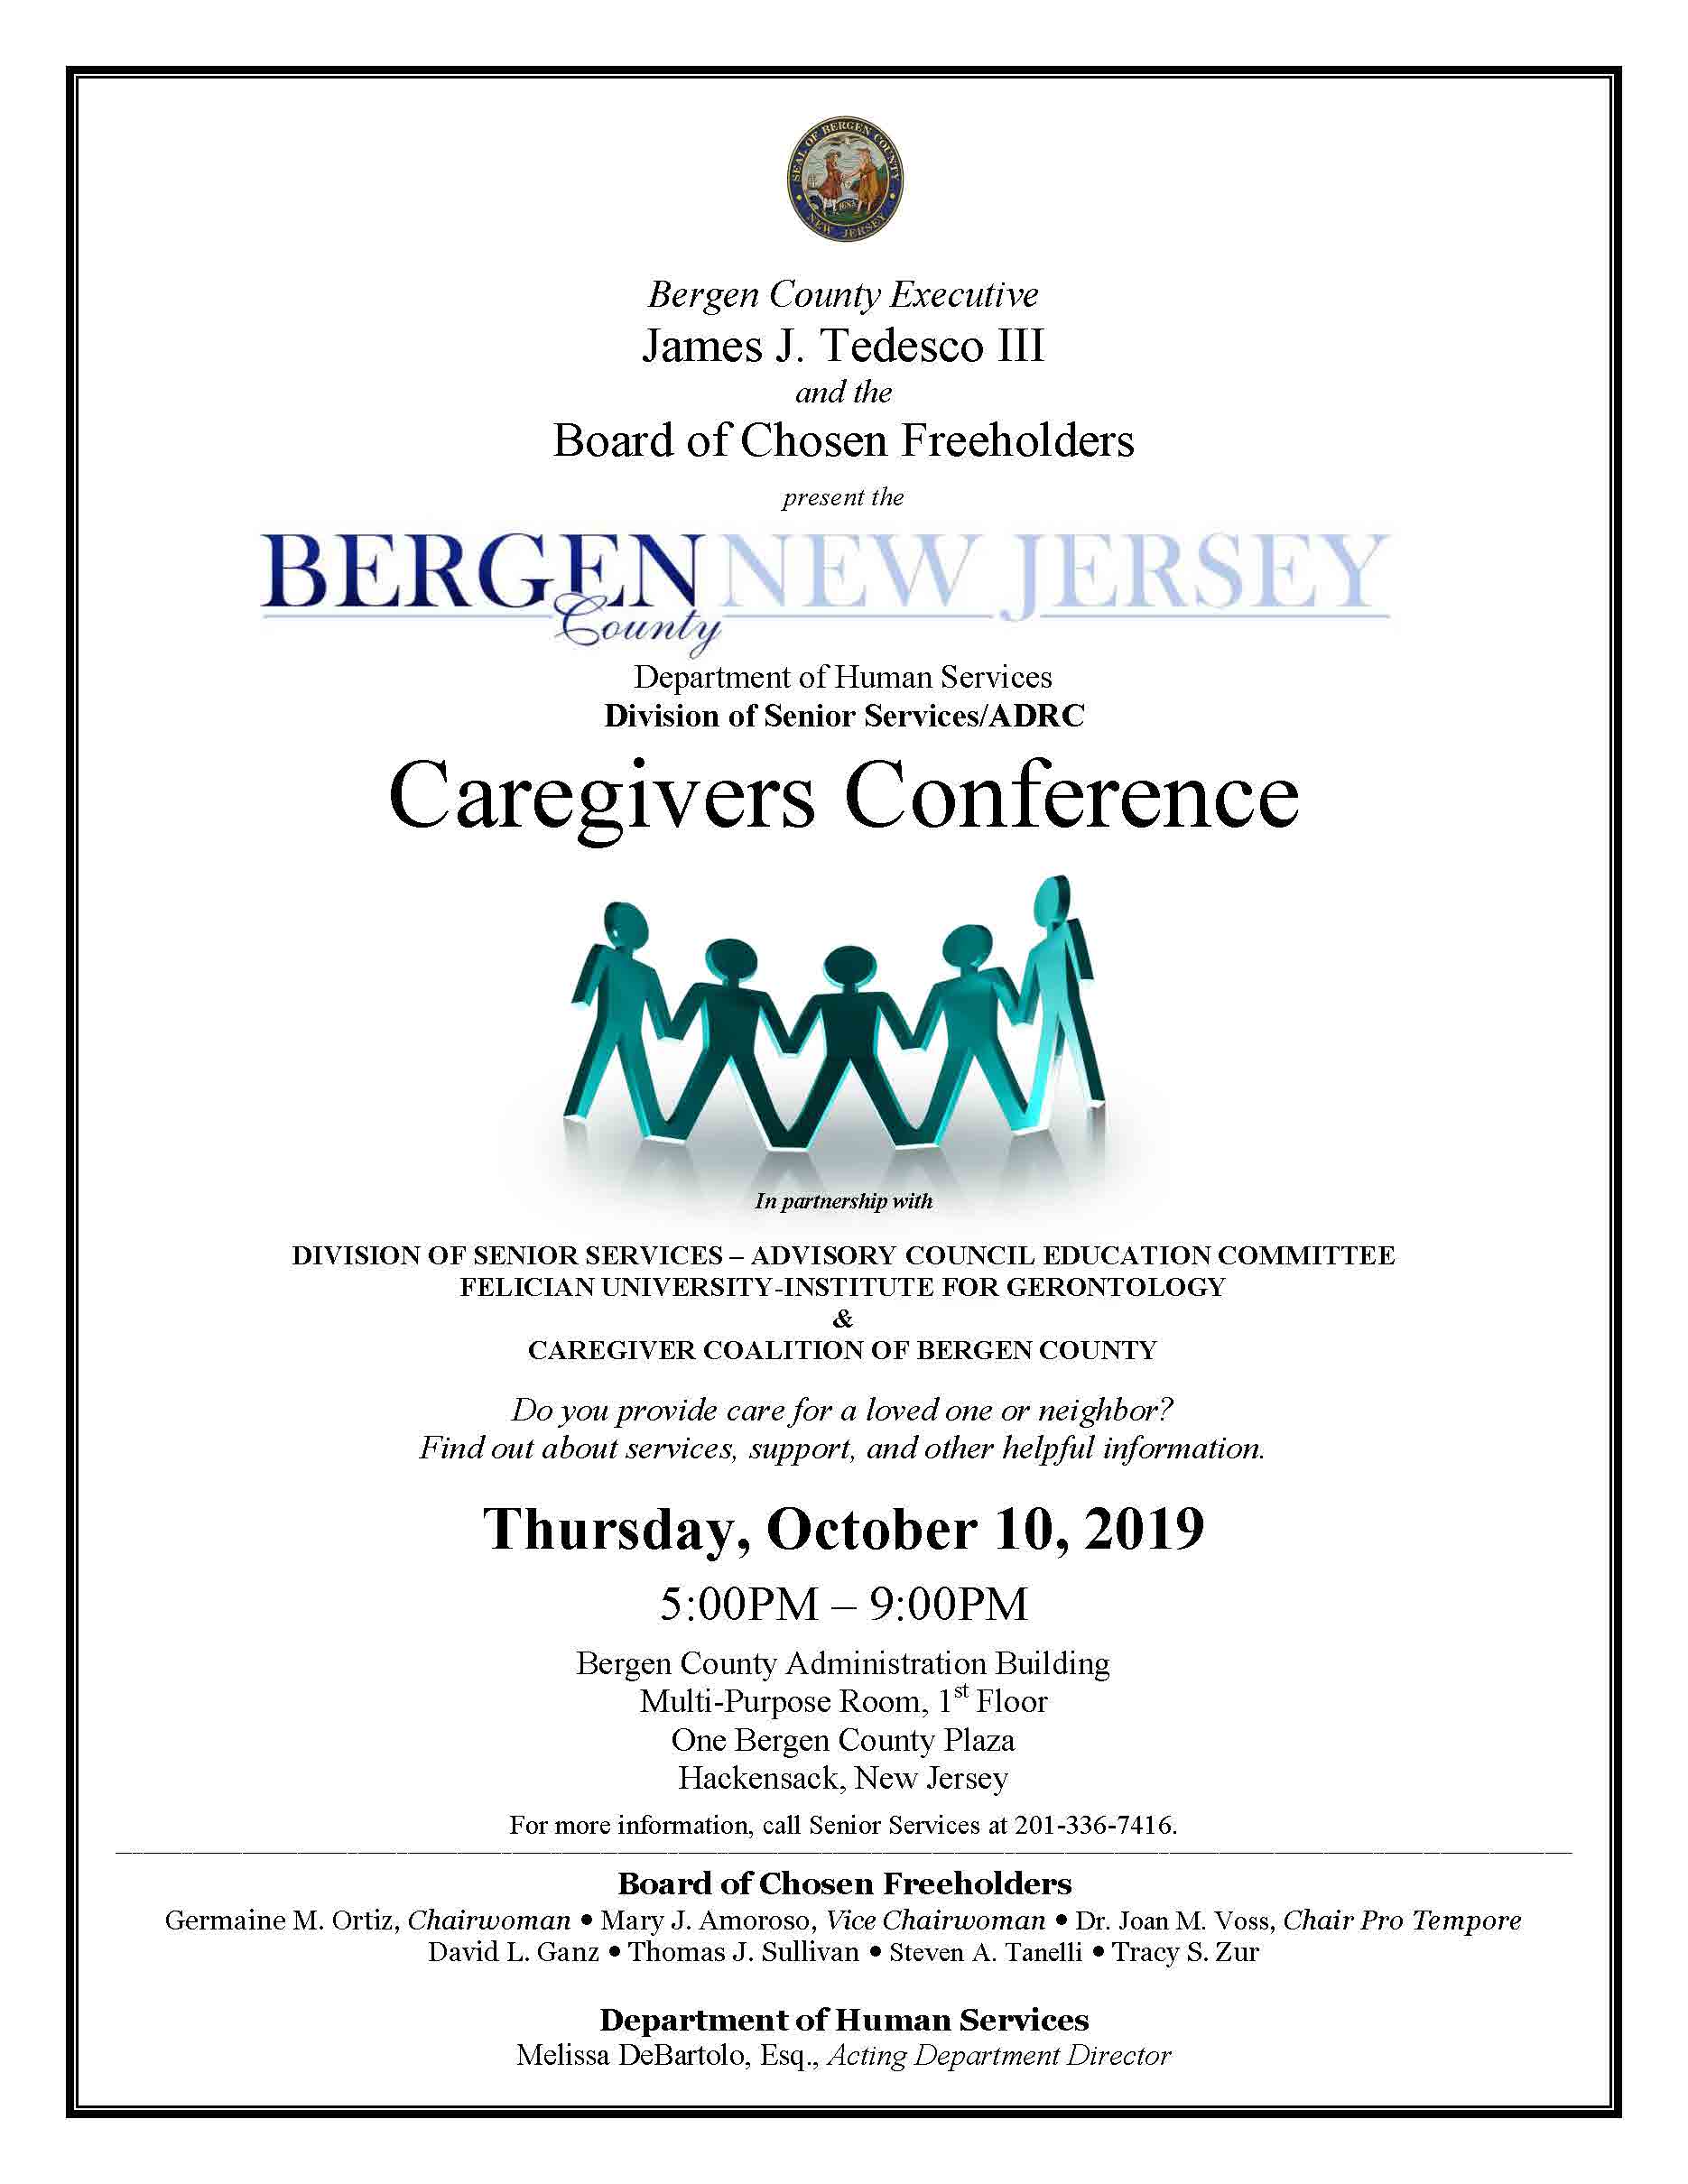 Fall Caregivers Conference Flyer 2019